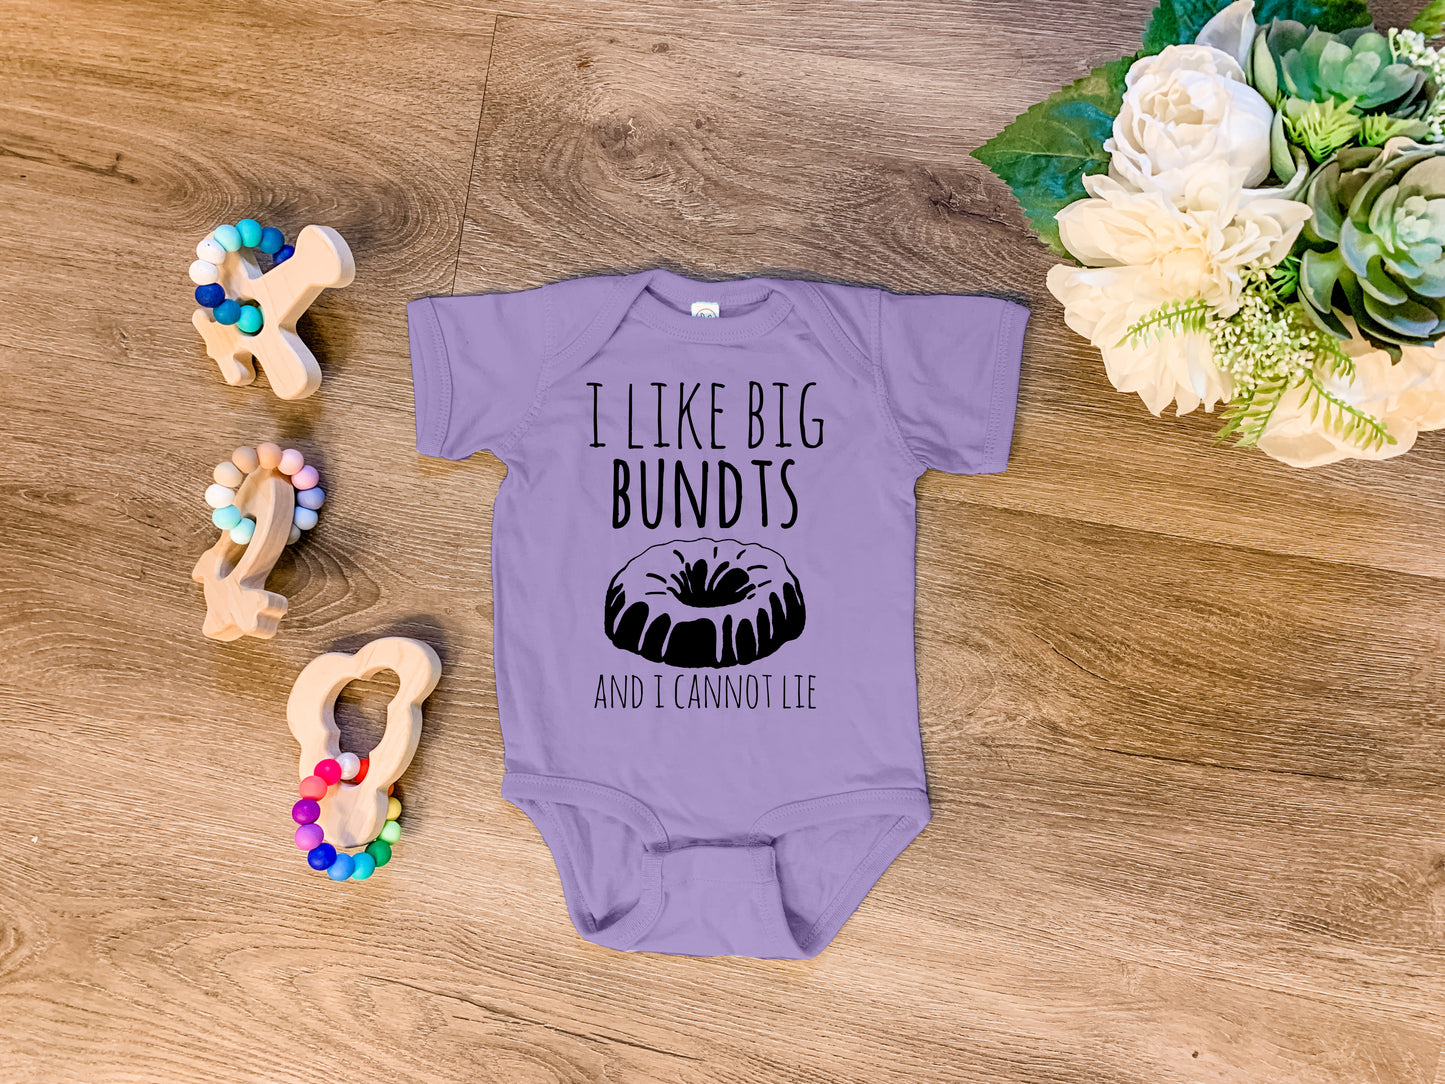 I Like Big Bundts and I Cannot Lie - Onesie - Heather Gray, Chill, or Lavender